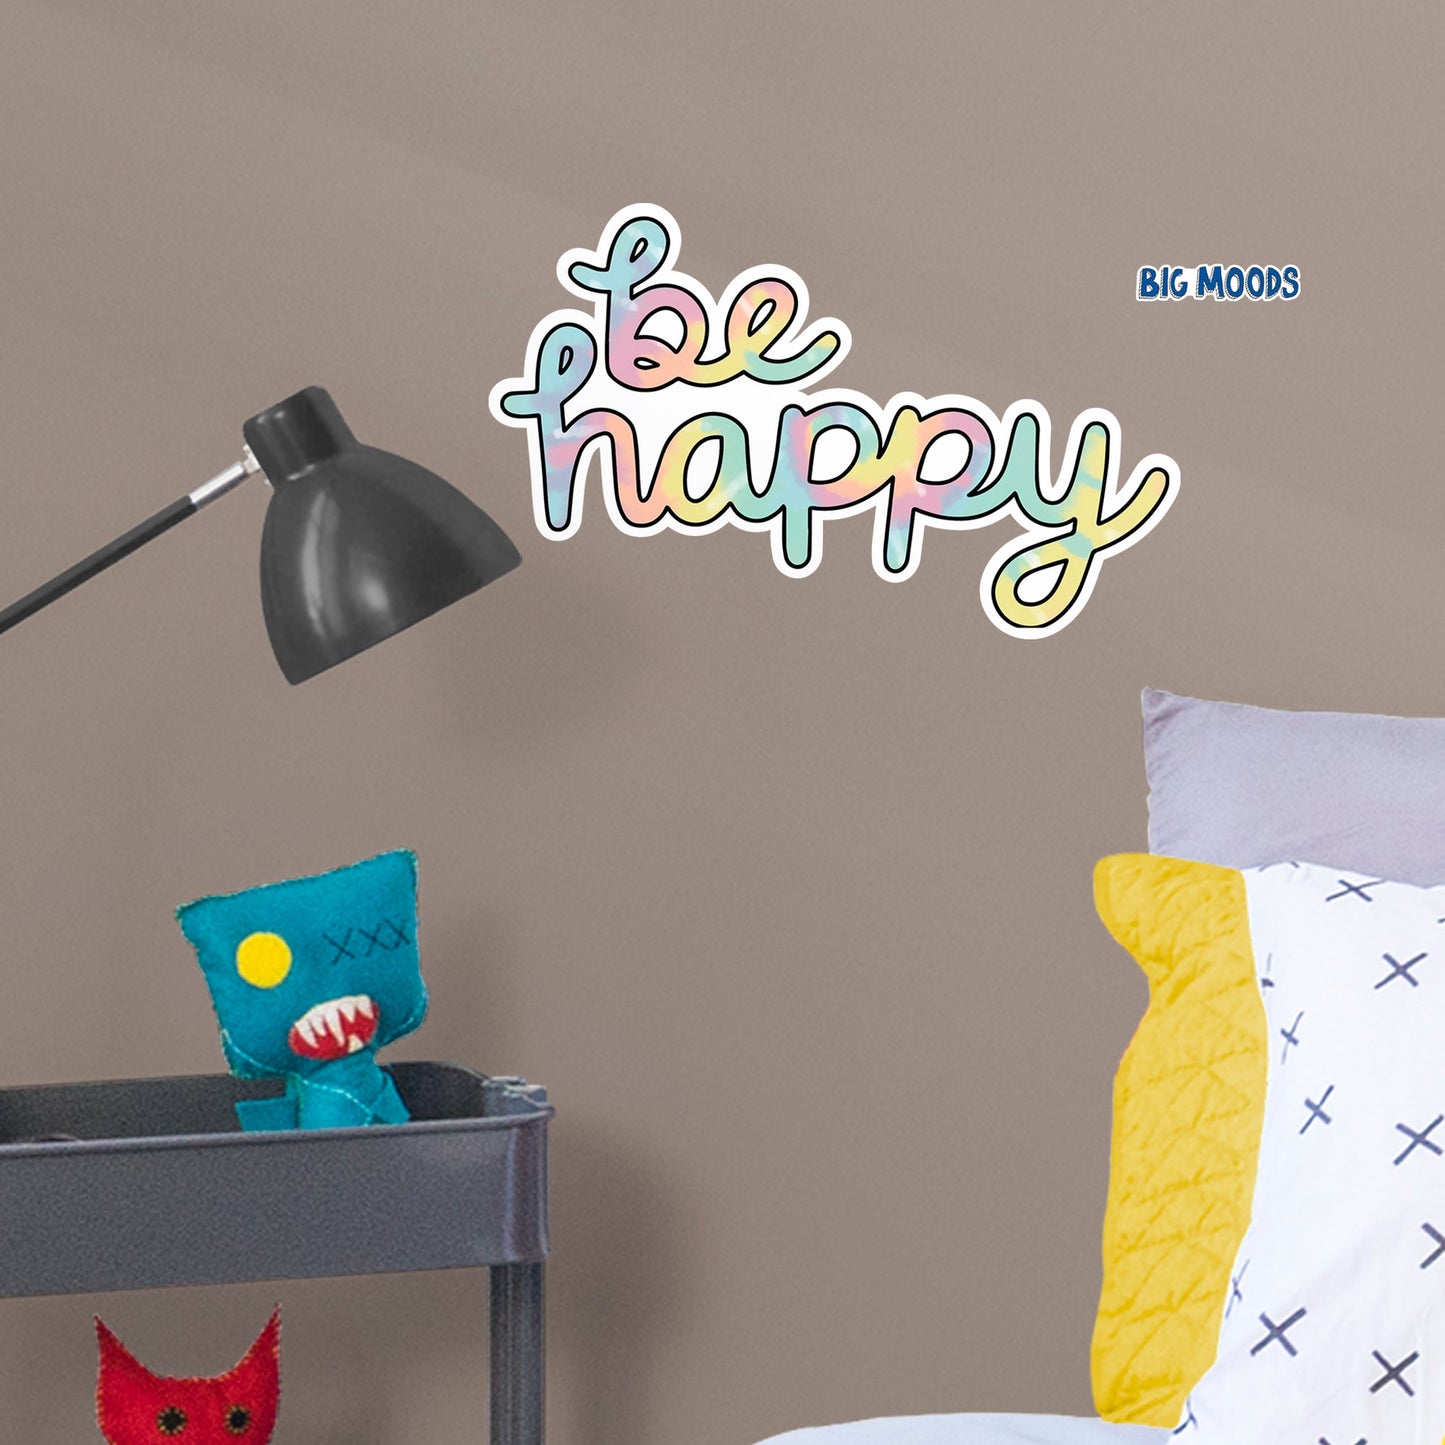 Be Happy (Tie-Dye)        - Officially Licensed Big Moods Removable     Adhesive Decal